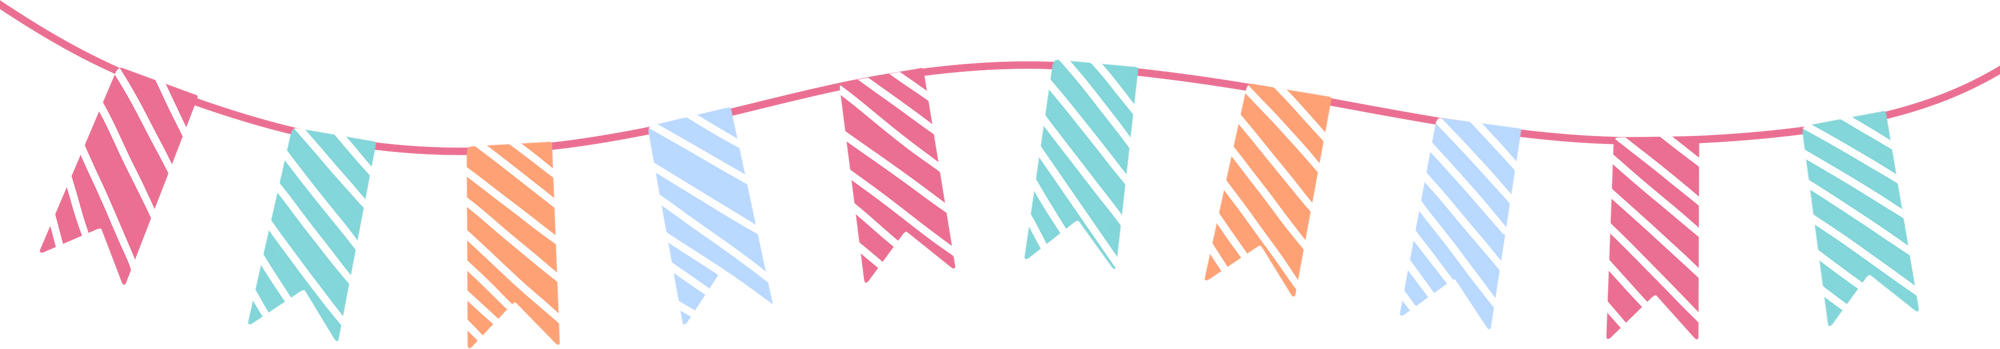 Cute and colorful stripes party banner